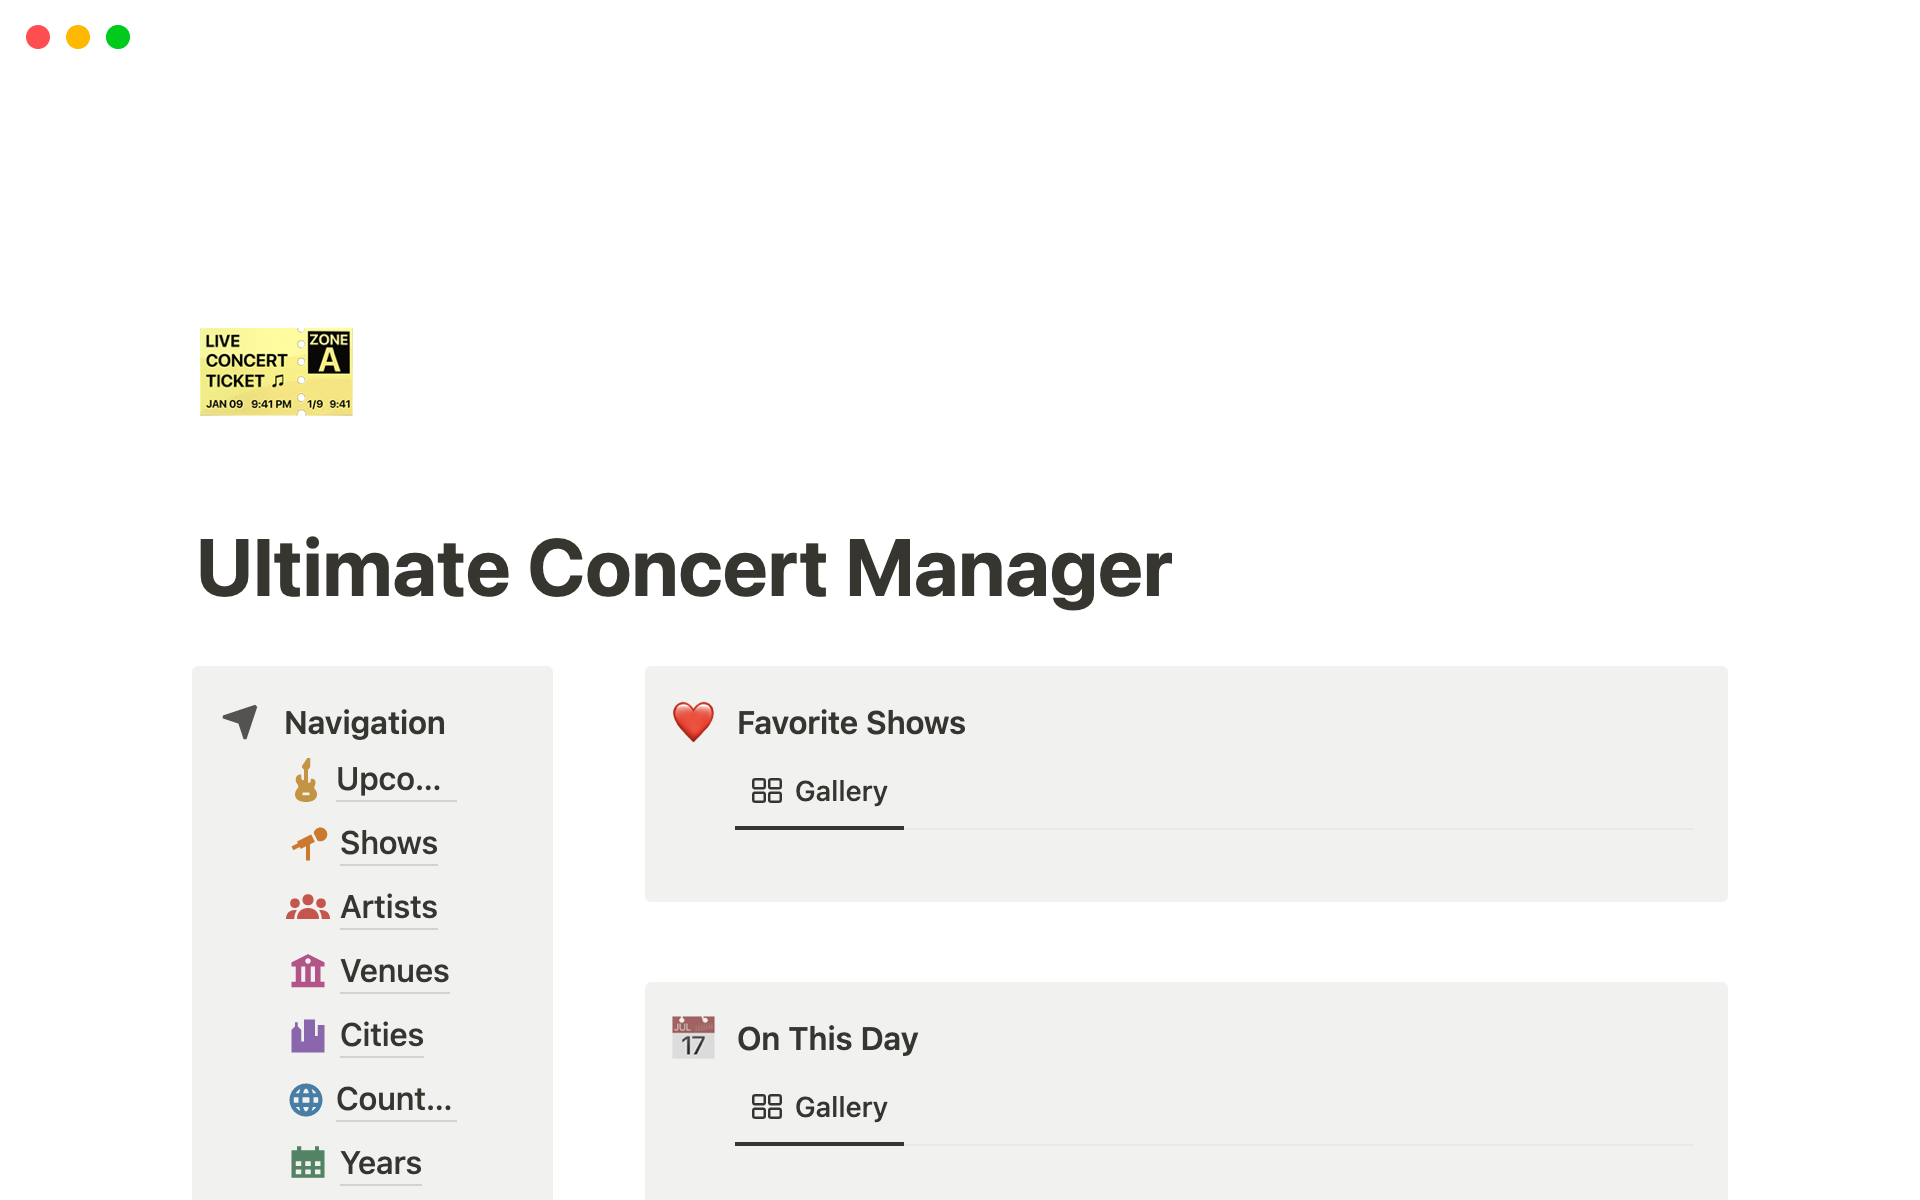 Ultimate Concert Manager is a system to manage, organize and document concerts you go to.